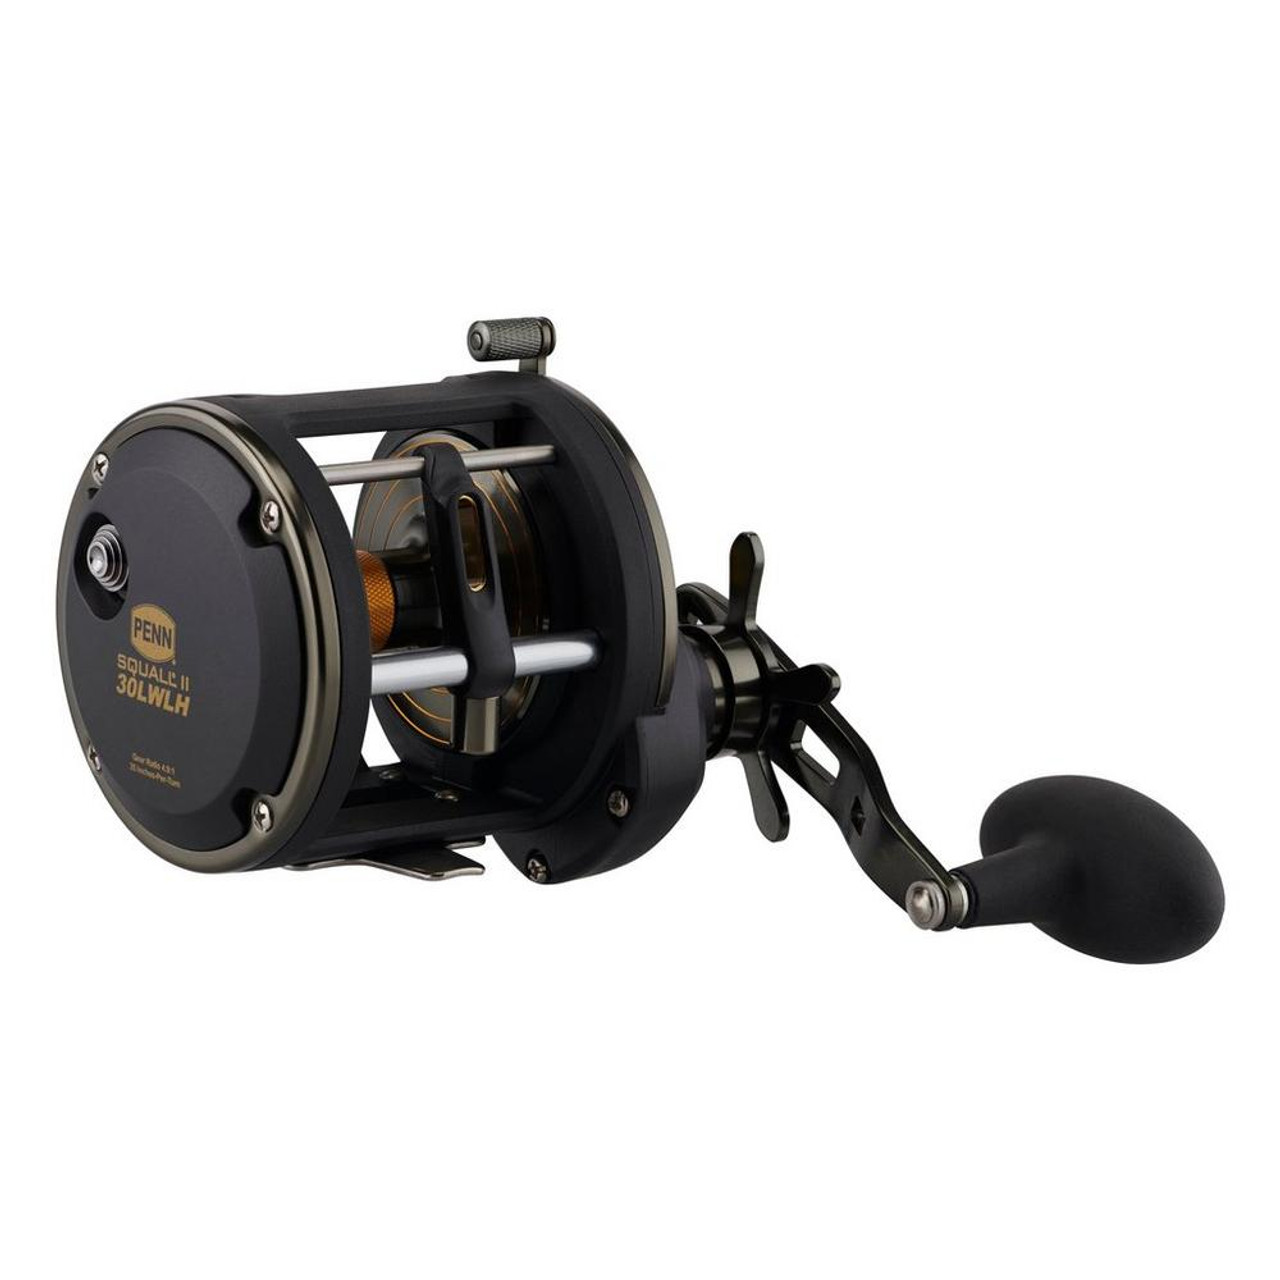 Penn Squall 30 Level Wind Fishing Rod and Trolling Reel Combo, 6.5 Feet  ((New Edition. )) : Buy Online at Best Price in KSA - Souq is now  : Sporting Goods